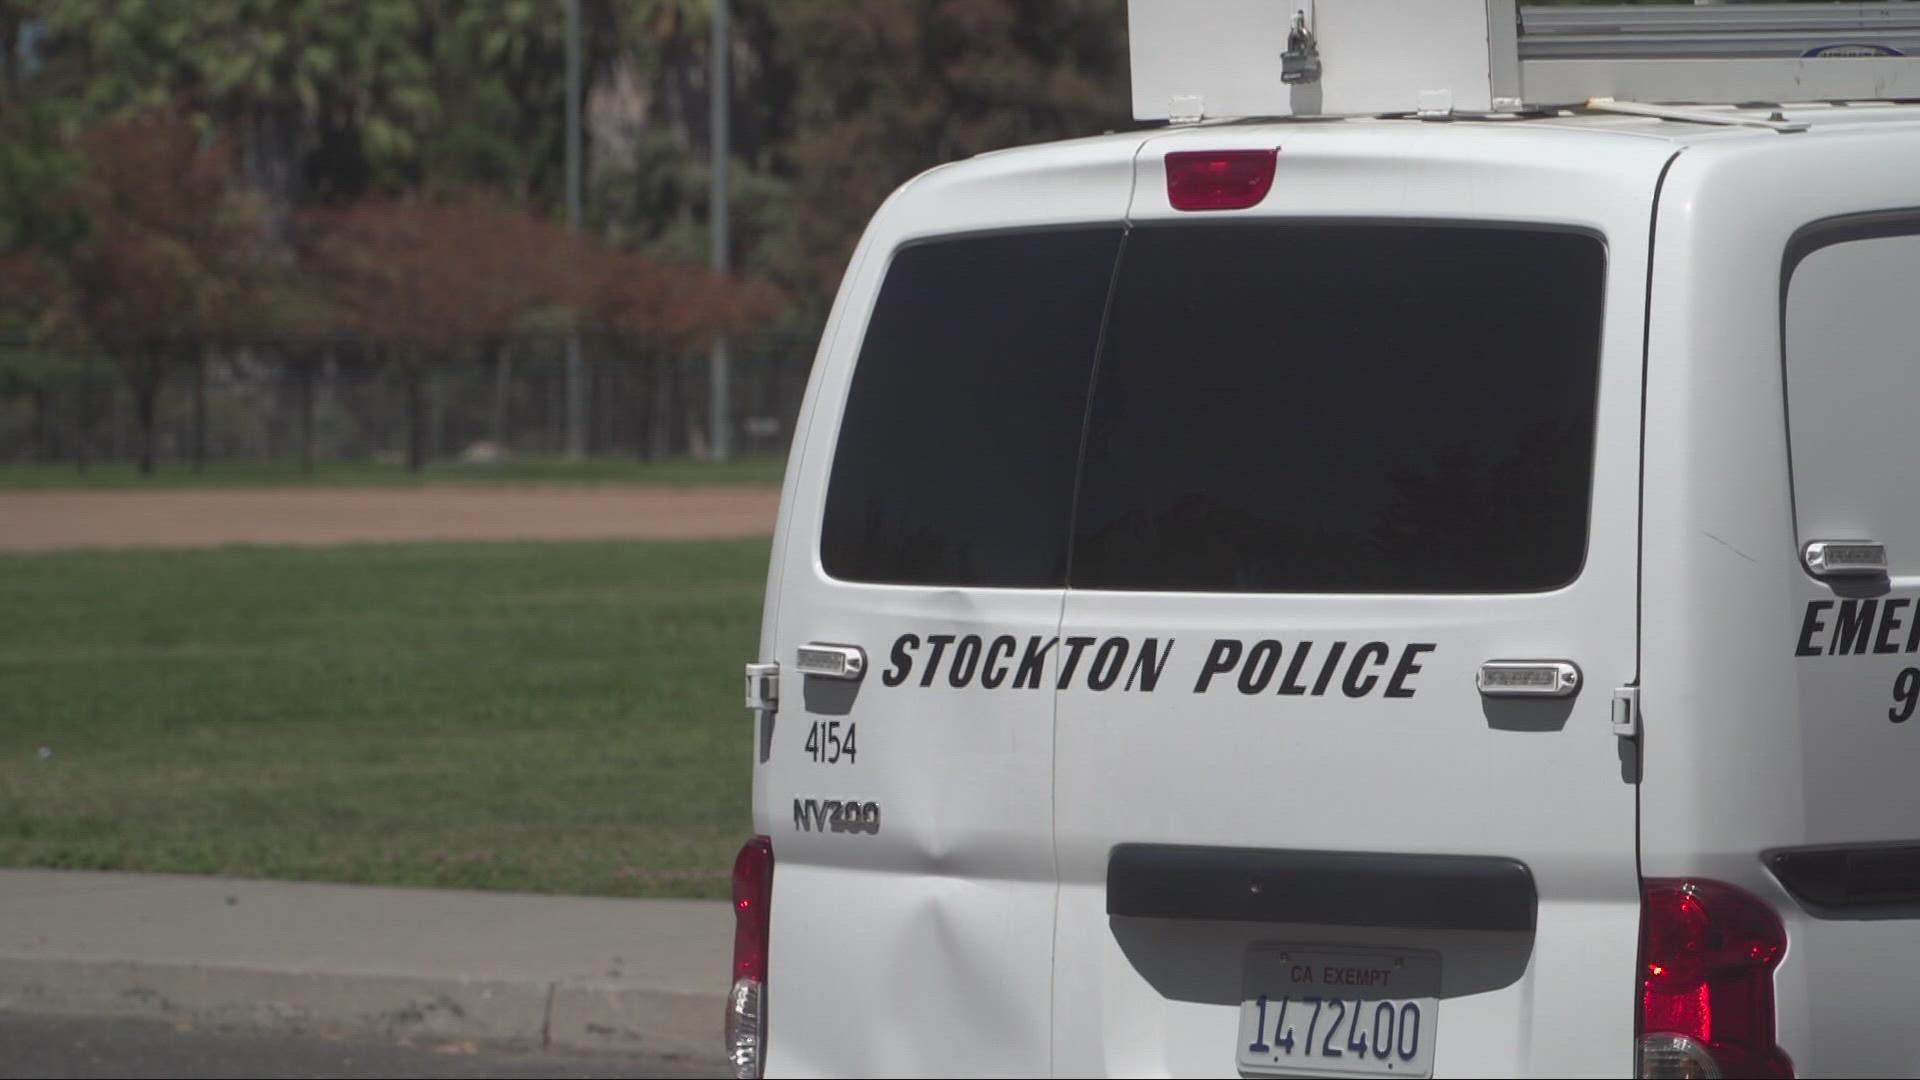 Mayor Kevin Lincoln says while the recent string of incidents involving gun violence is upsetting, it's a problem that's not exclusive to Stockton.